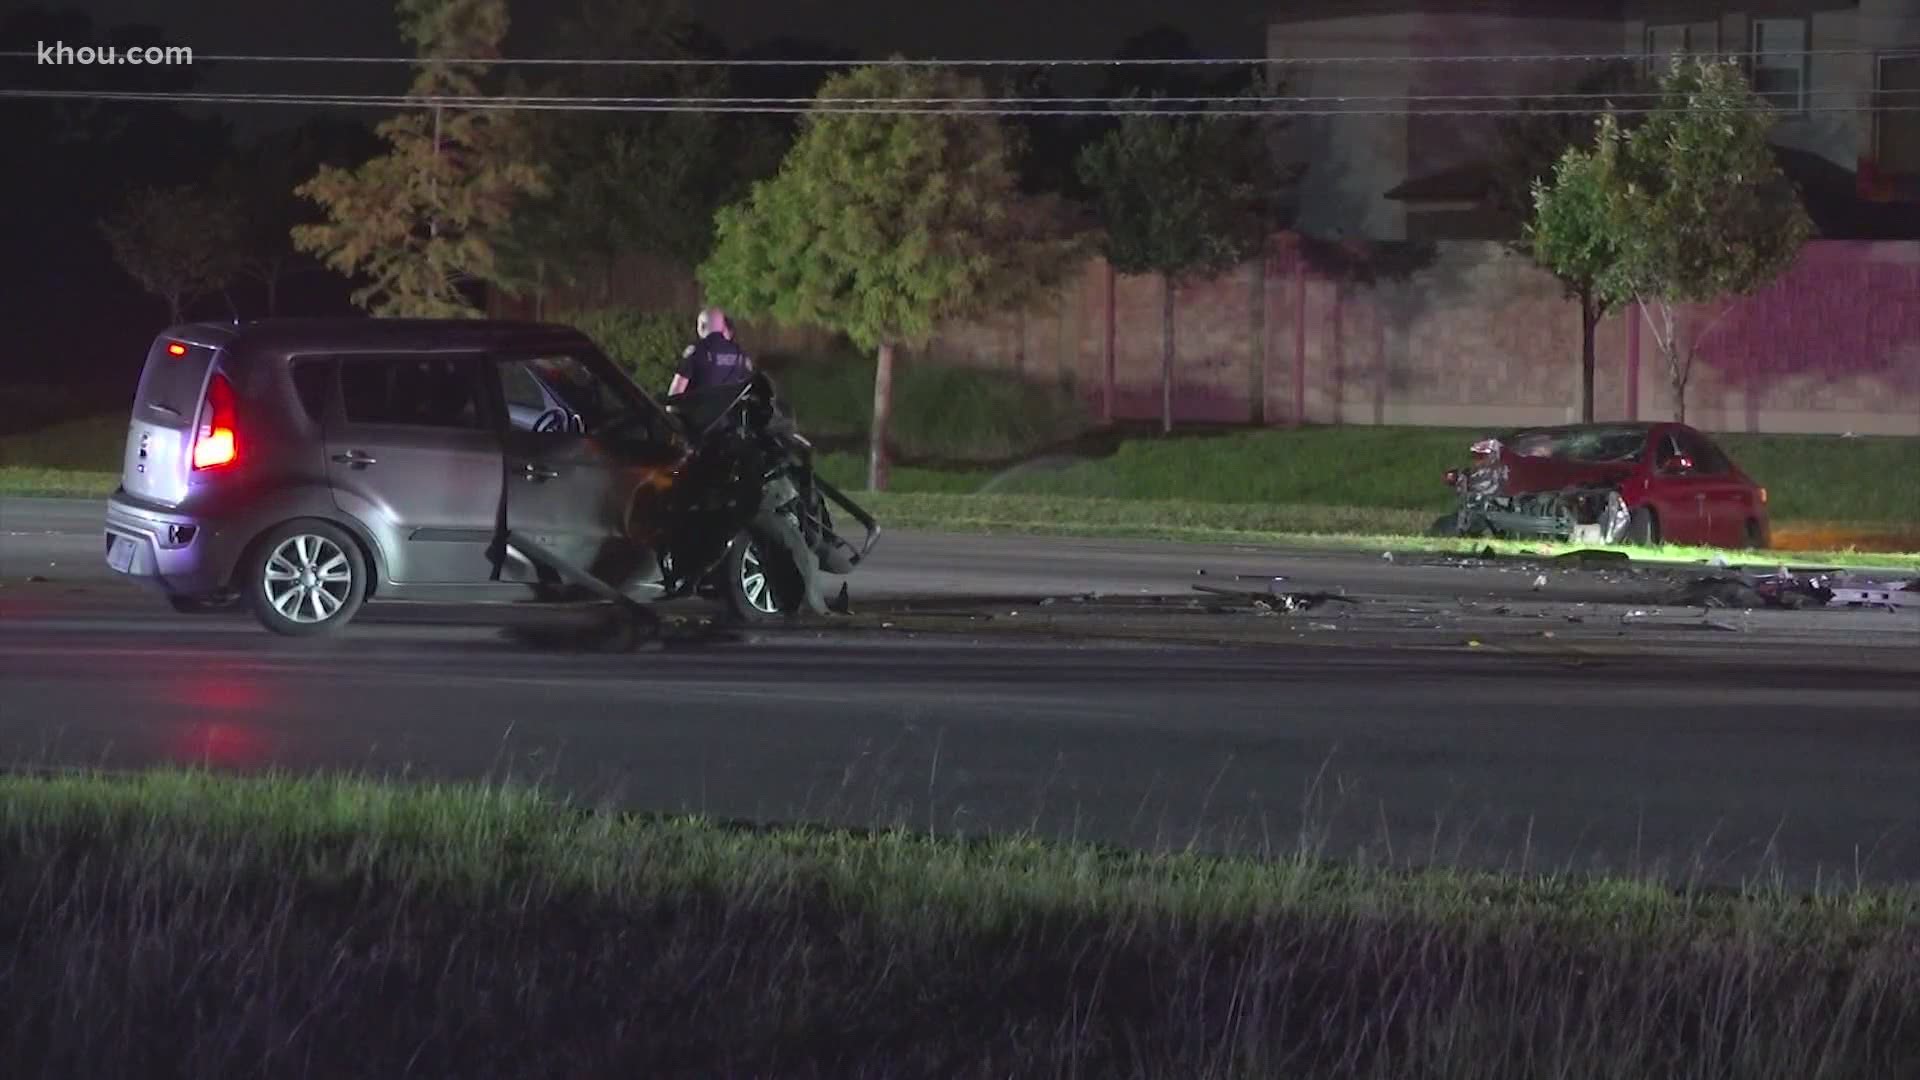 A driver is facing charges after a serious crash overnight on Spring Cypress.